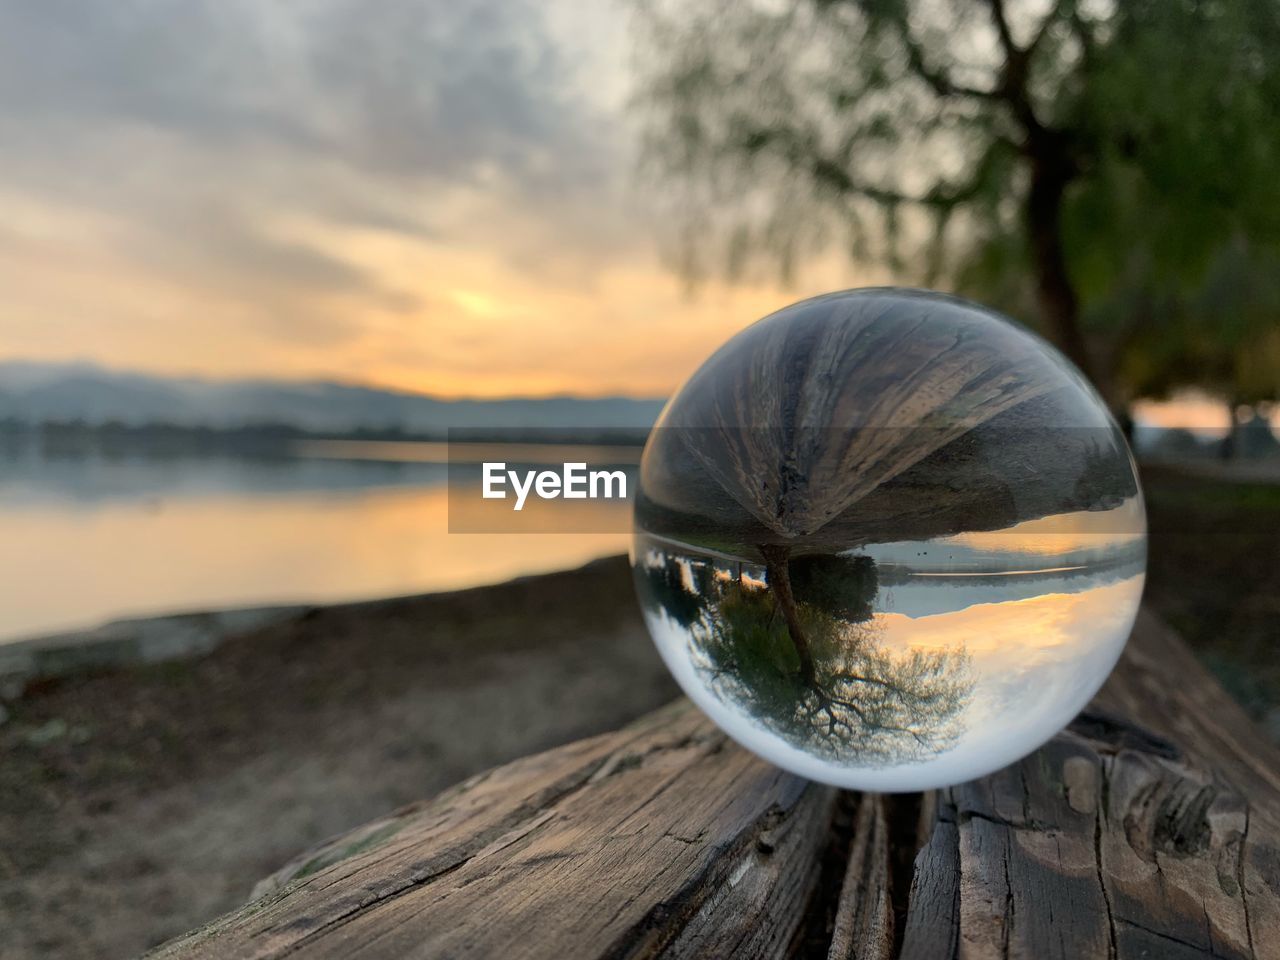 CLOSE-UP OF CRYSTAL BALL ON WATER AT SUNSET